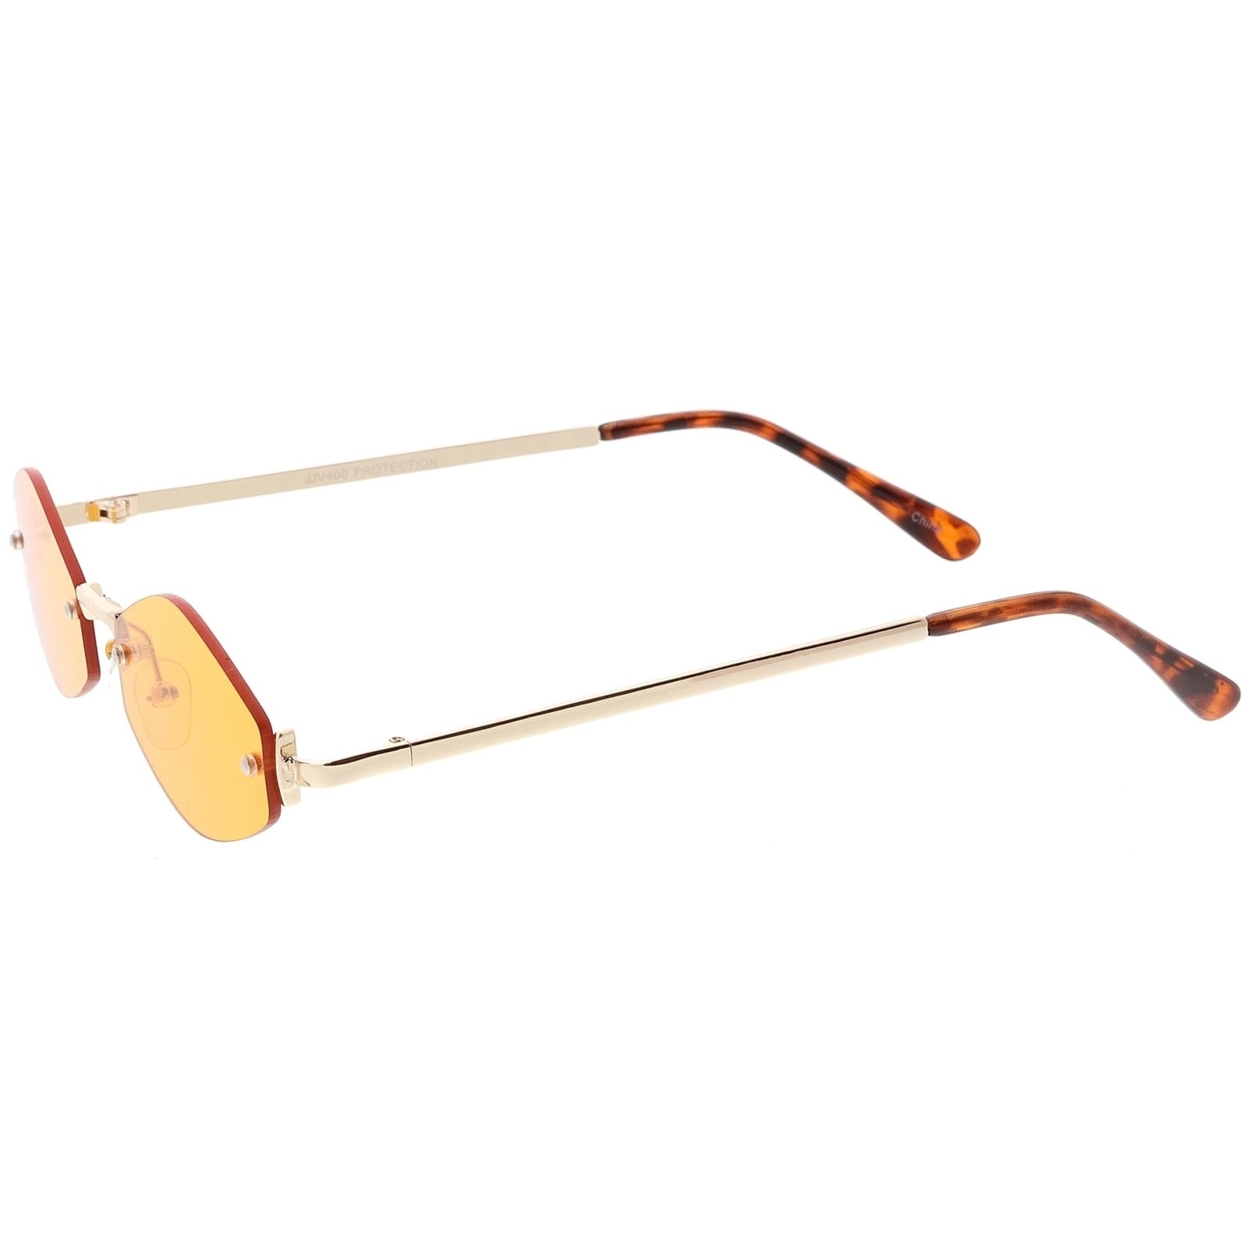 Extreme Small Geometric Rimless Sunglasses Color Tinted Lens 52mm - Gold / Orange